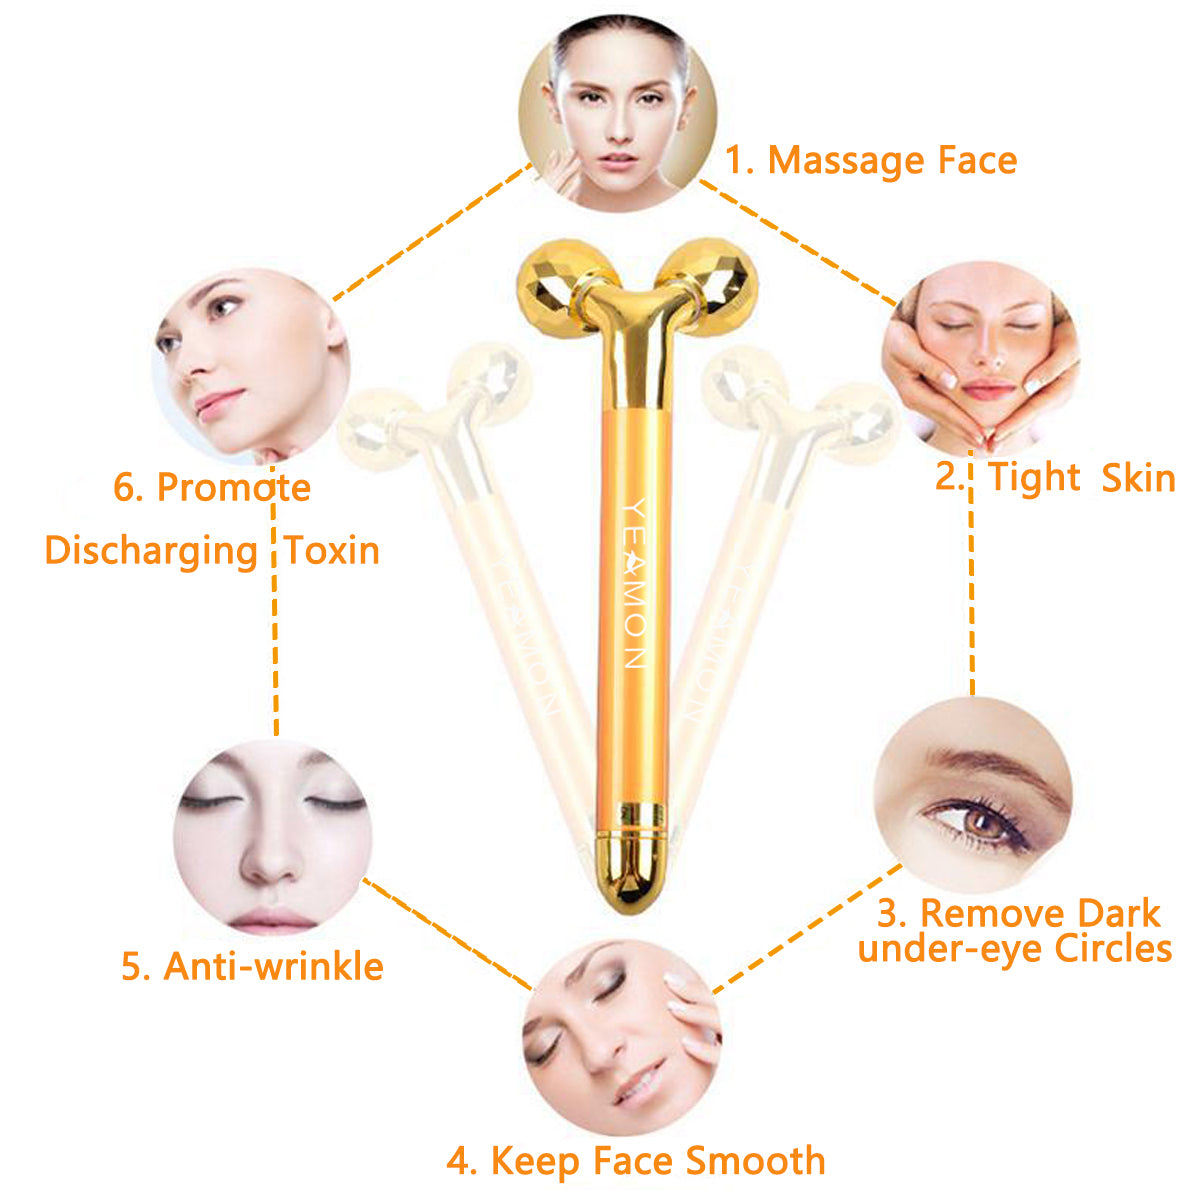 Yeamon 2 in 1 Face Massager Golden Facial Electric 3D Roller and T Shape Arm Eye Nose Massager Skin Care Tools